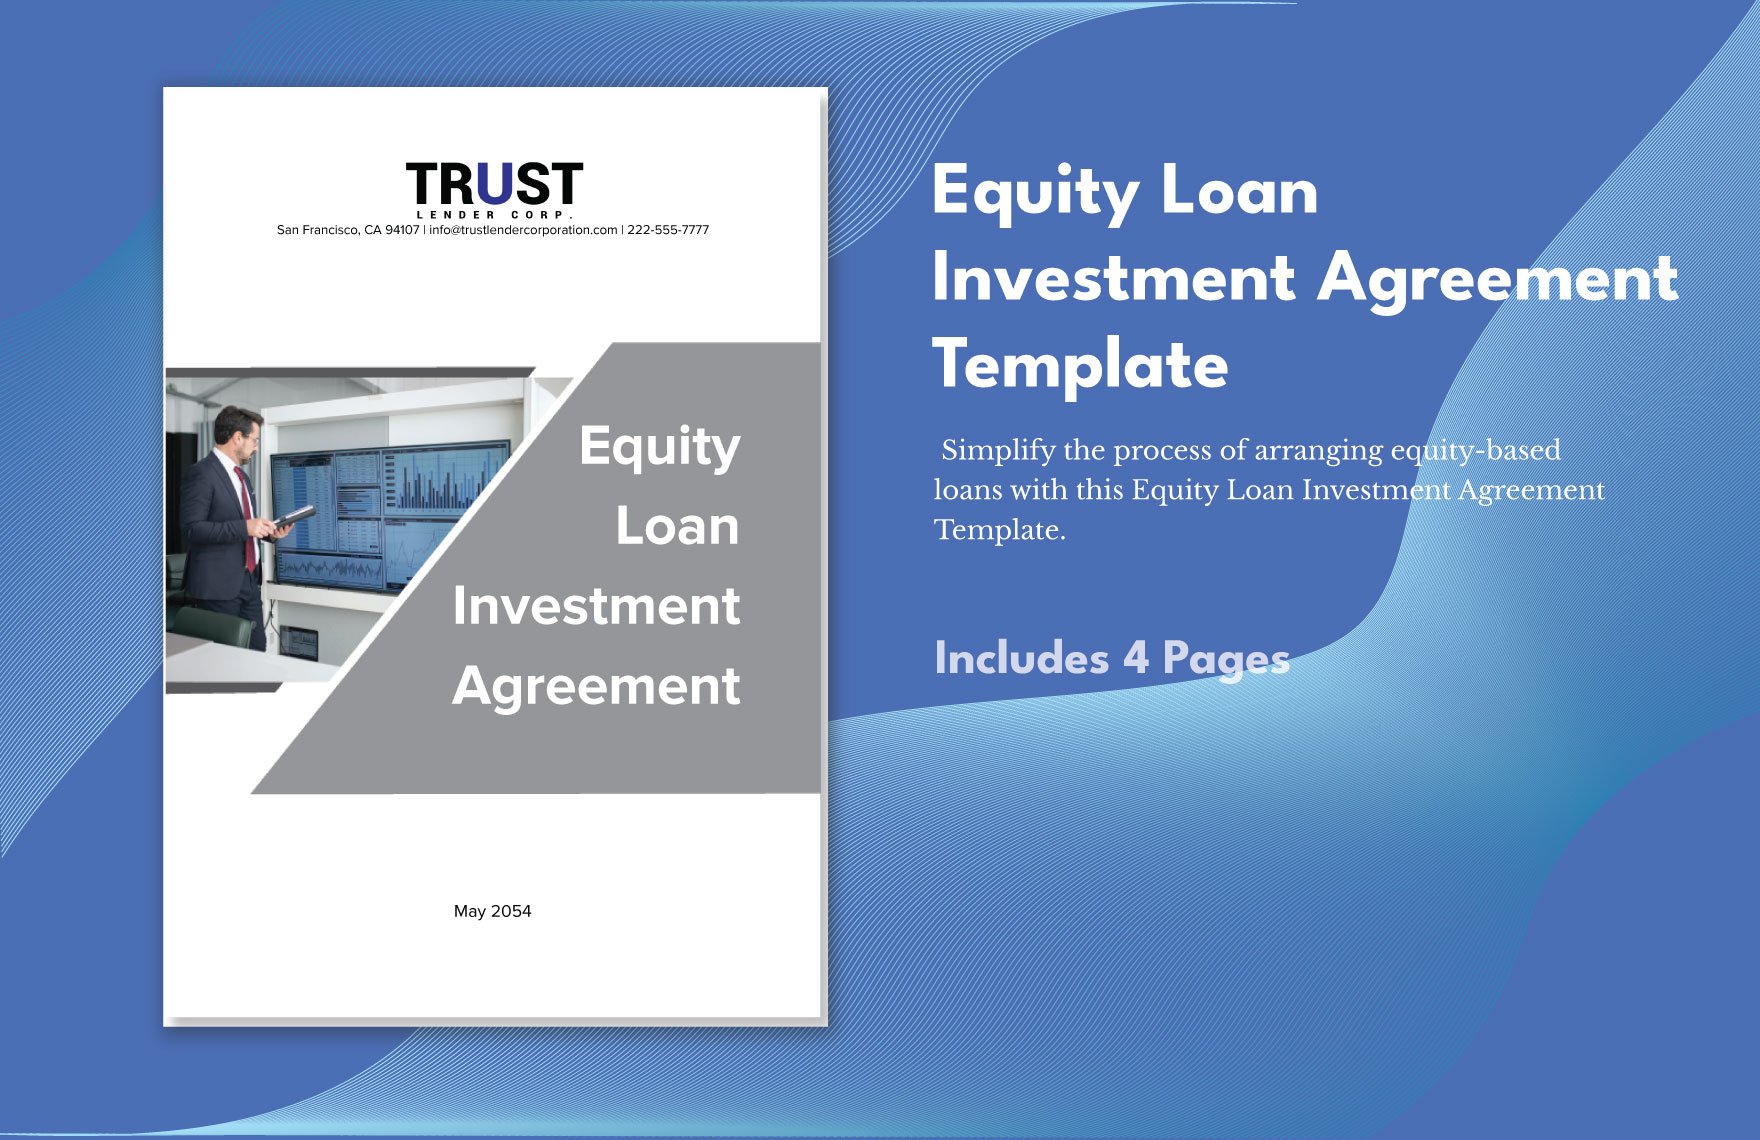 equity-loan-investment-agreement